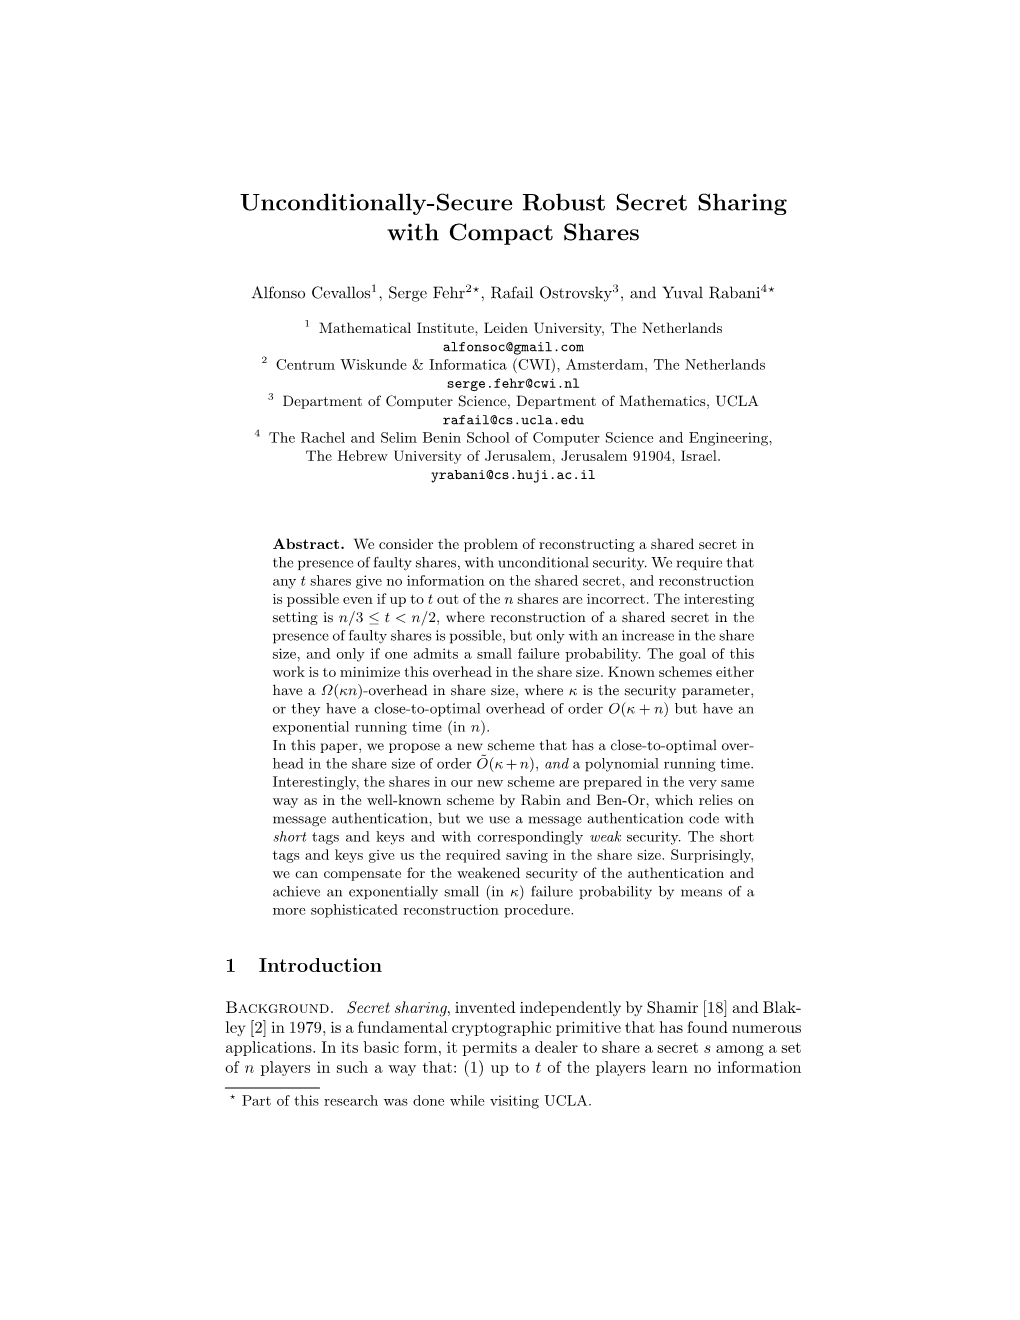 Unconditionally-Secure Robust Secret Sharing with Compact Shares